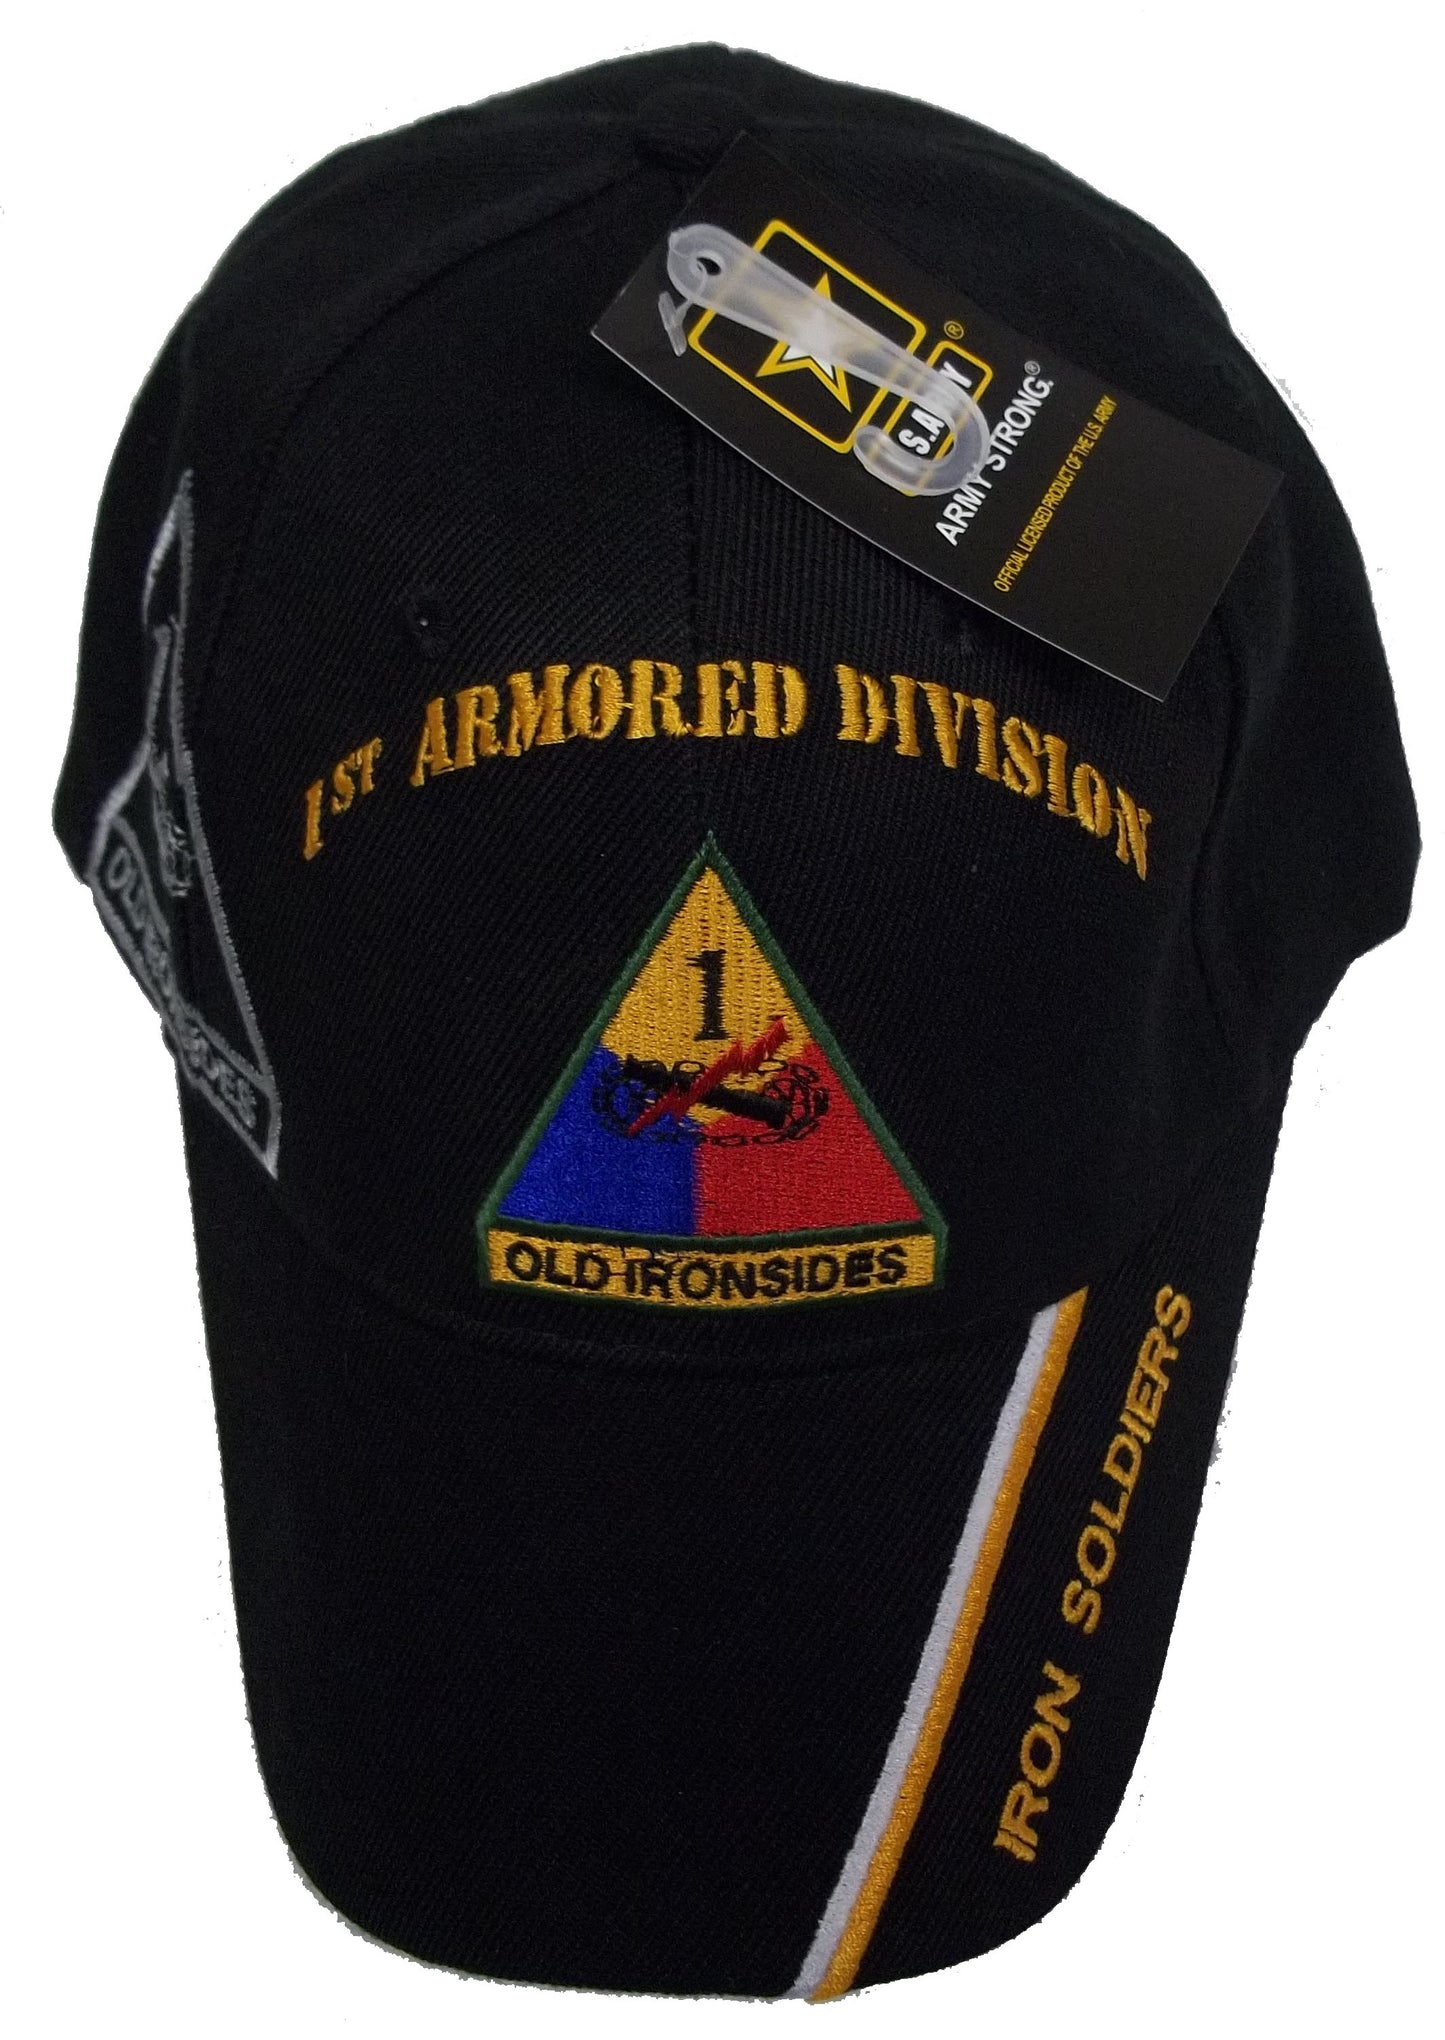 1st ARMORED DIVISION OLD IRONSIDES IRON SOLDIERS BASEBALL STYLE EMBROIDERED HAT usa army cap